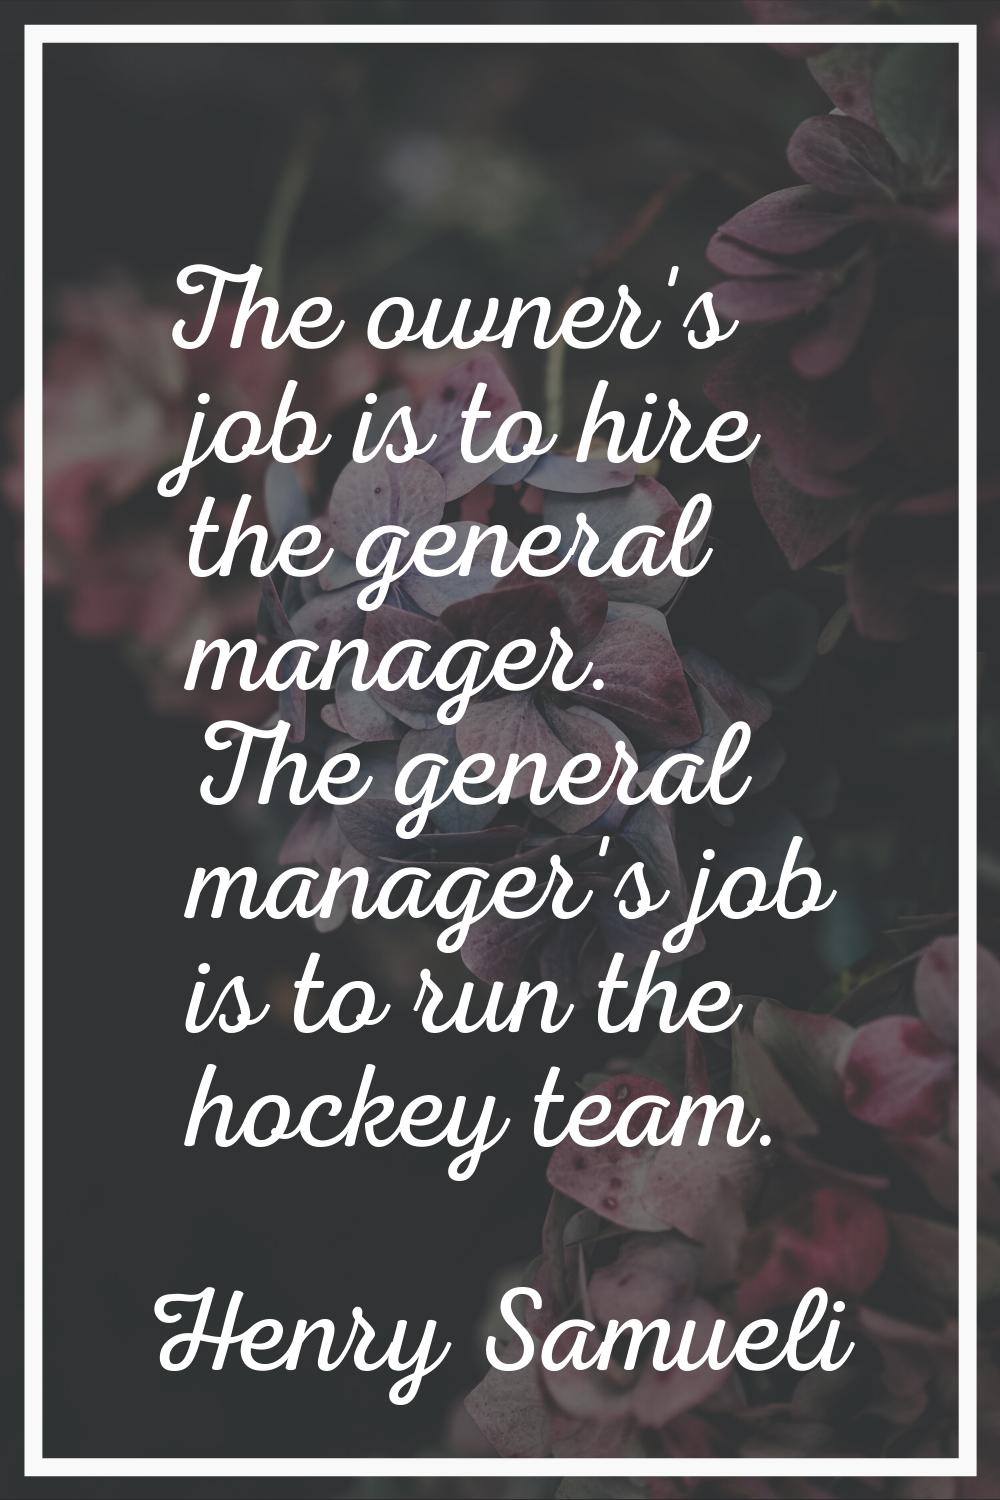 The owner's job is to hire the general manager. The general manager's job is to run the hockey team